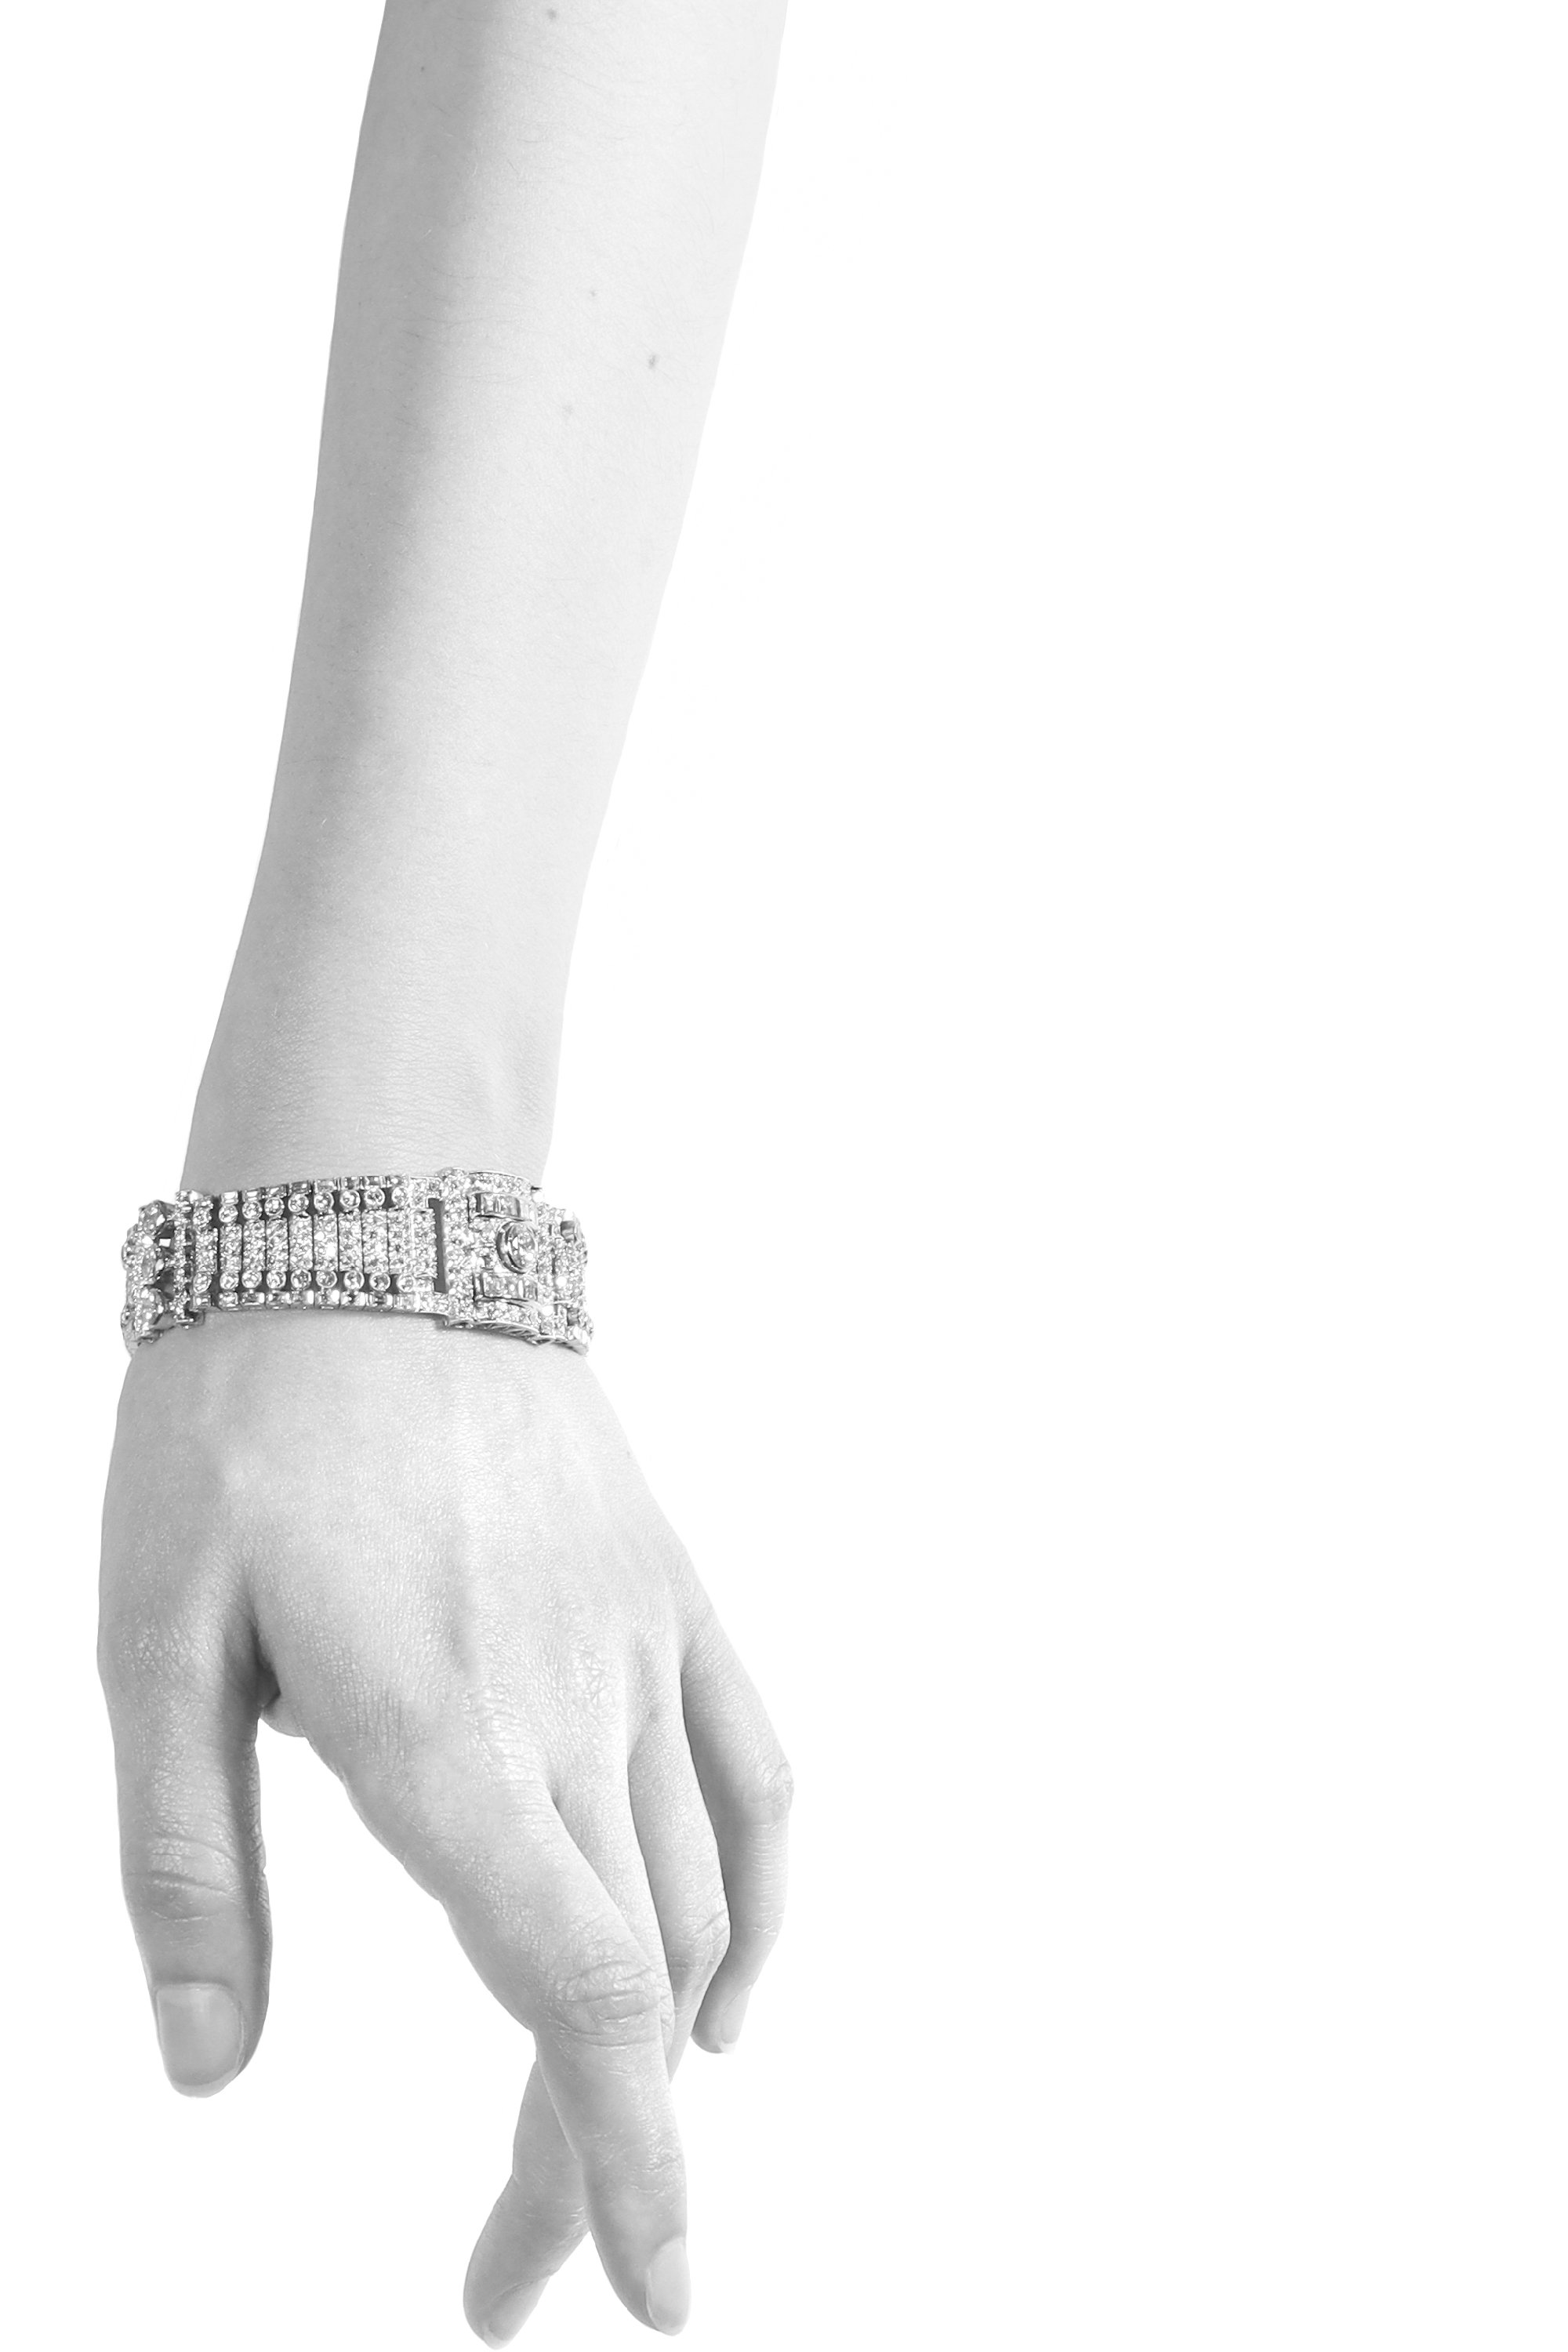 Click the picture to find out more about this Vintage Art Deco platinum diamond wrist band bracelet with over 20 crts total diamond weight